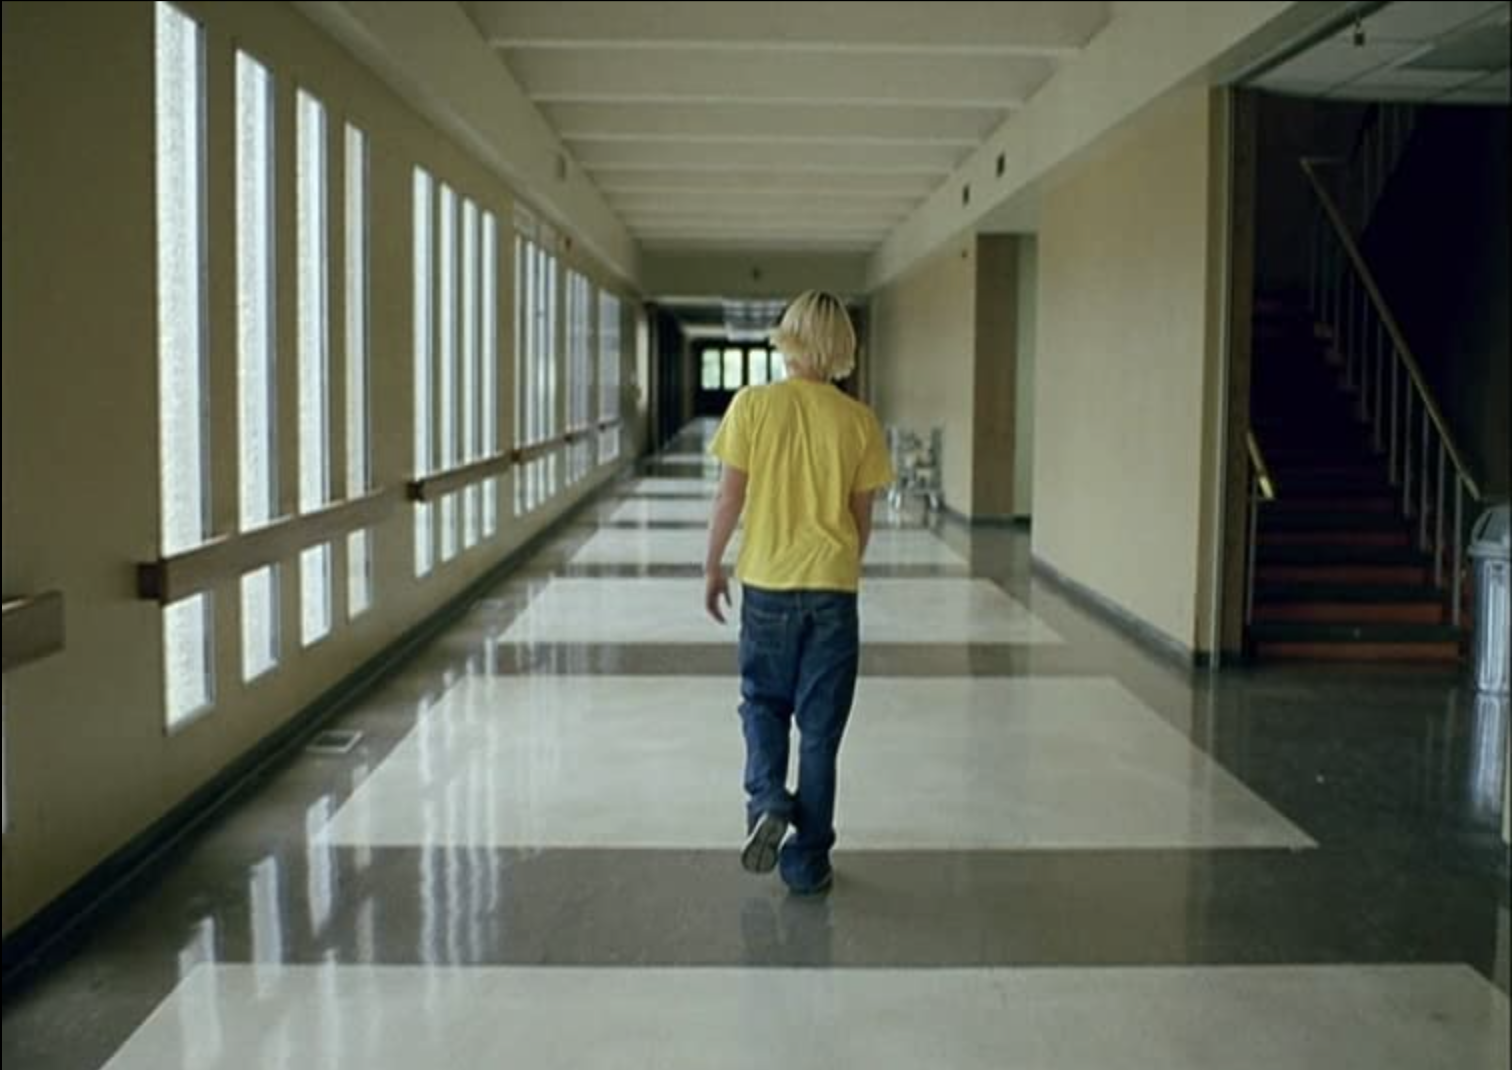 A blonde-haired person wearing a yellow t-shirt, baggy jeans, and sneakers. They walk down a school hallway, seen from behind at a distance.